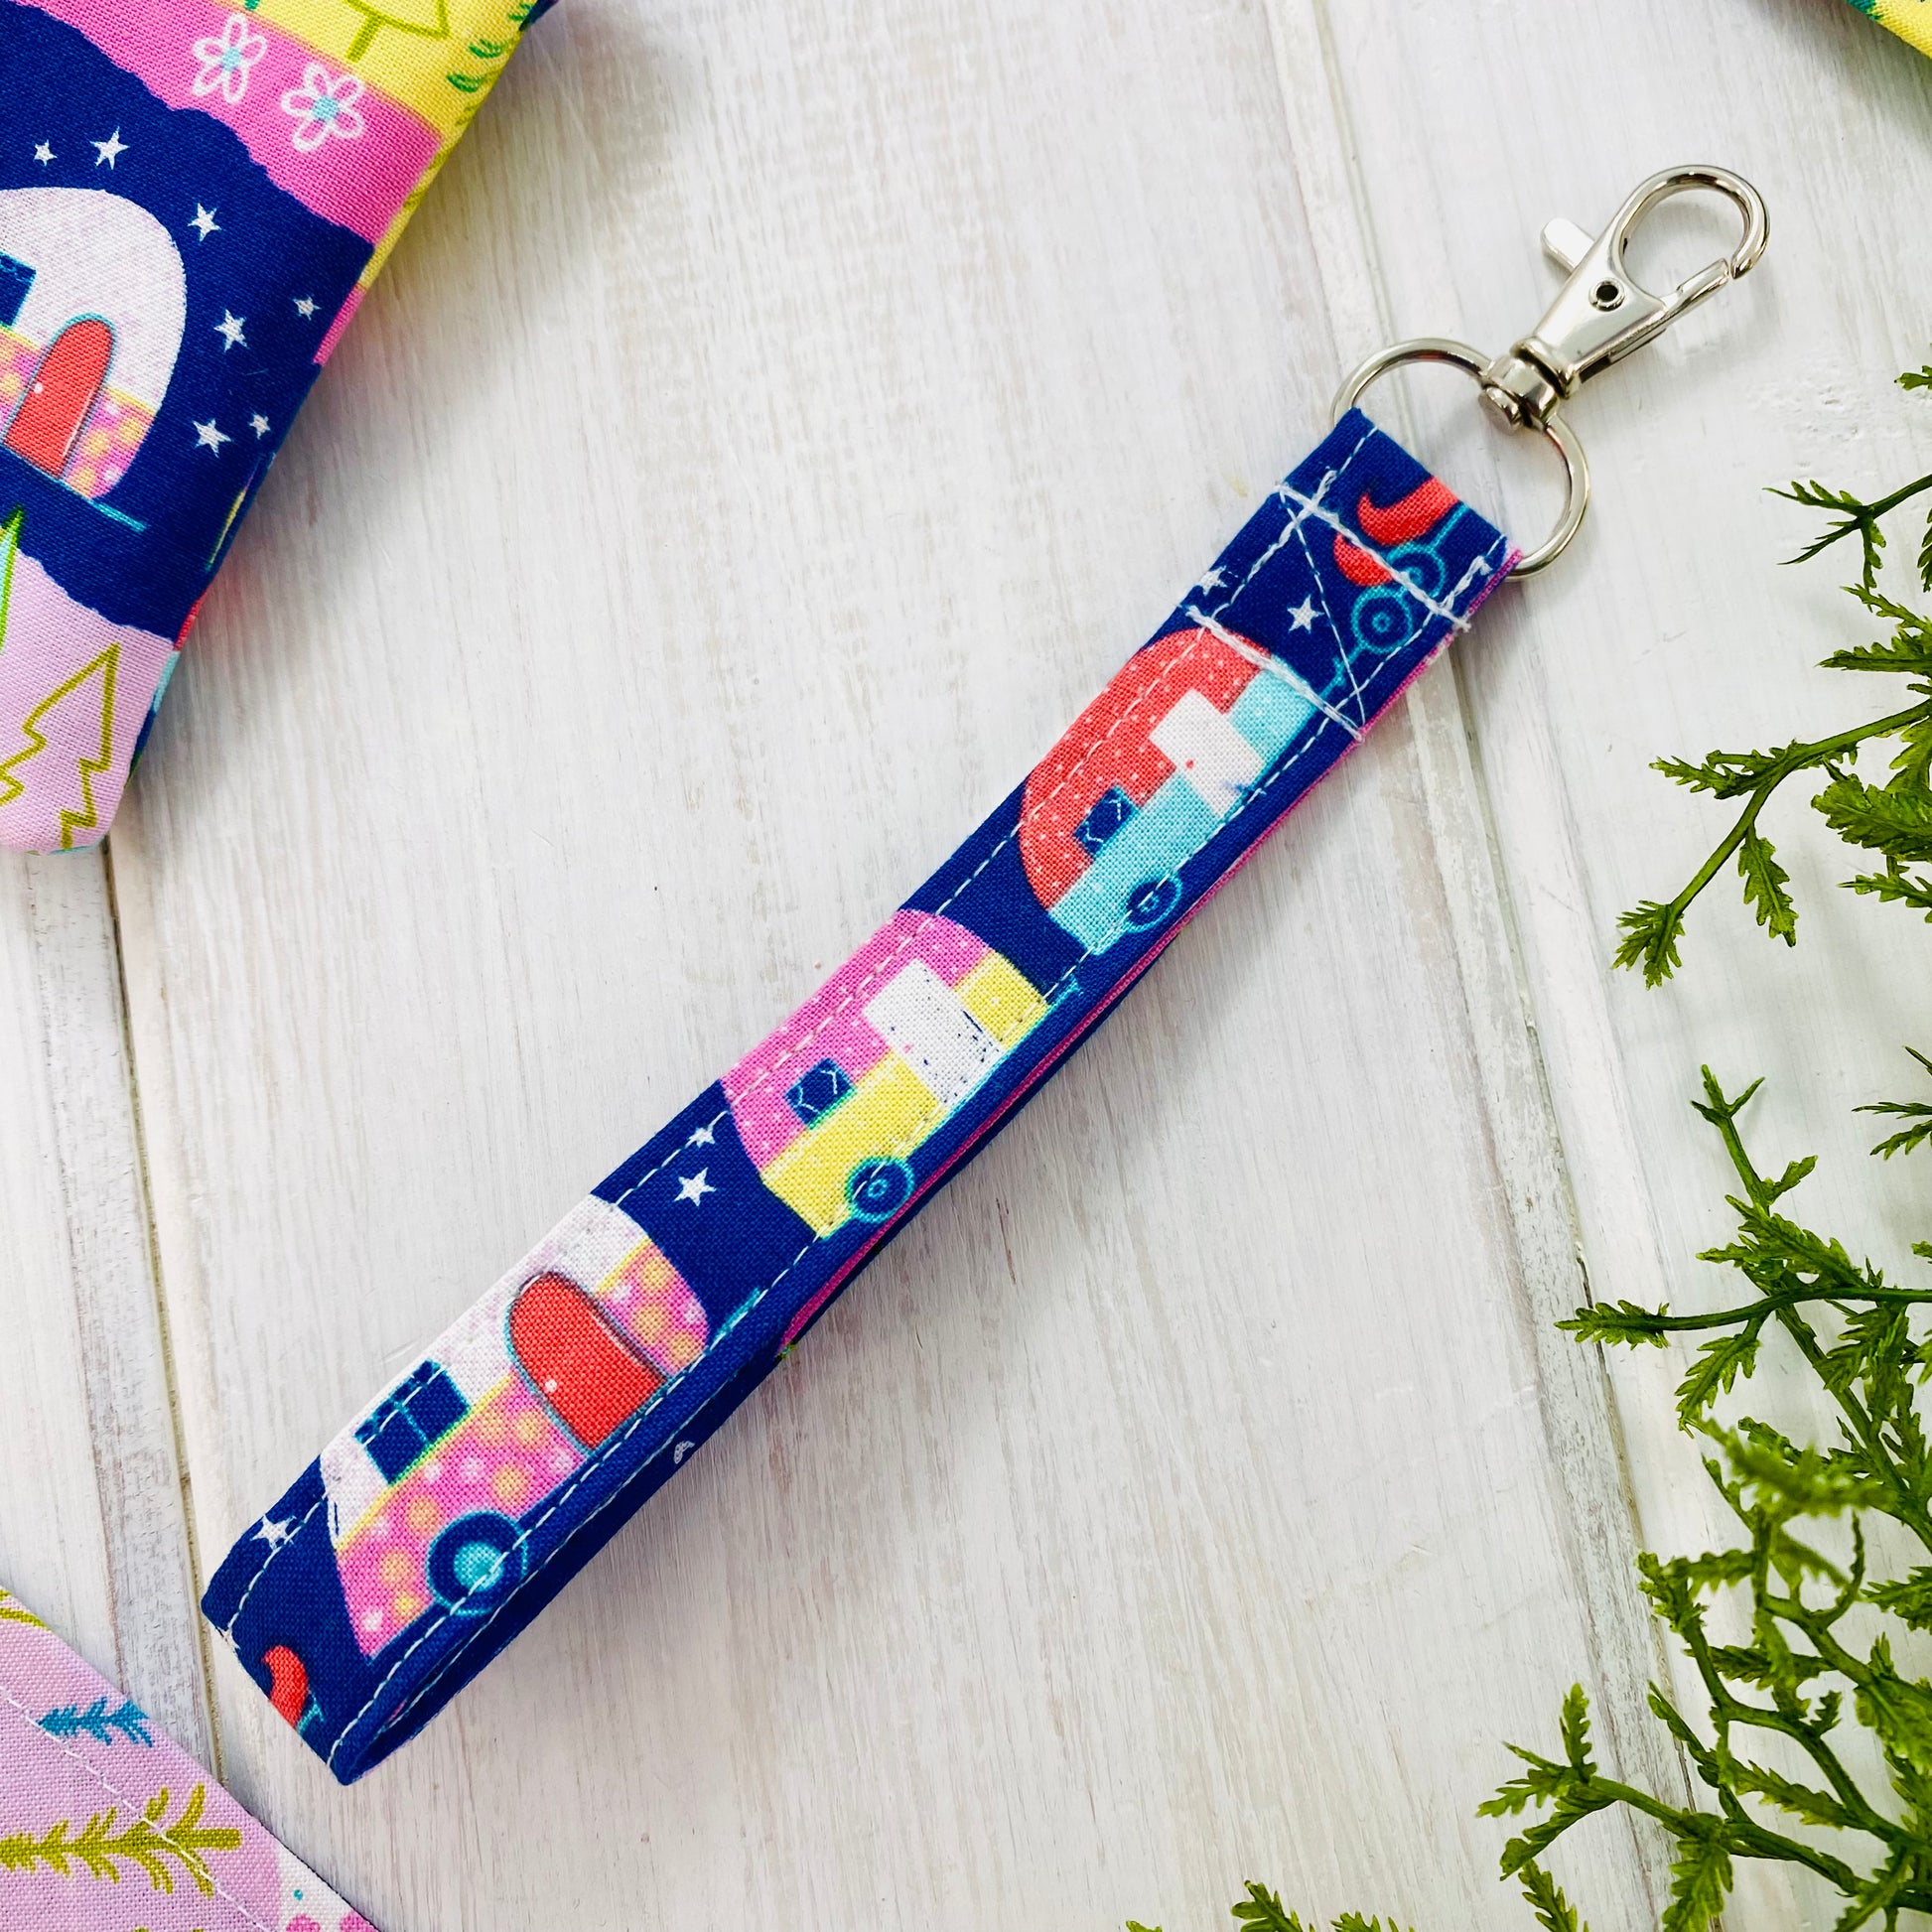 Camper outdoor theme key fob.